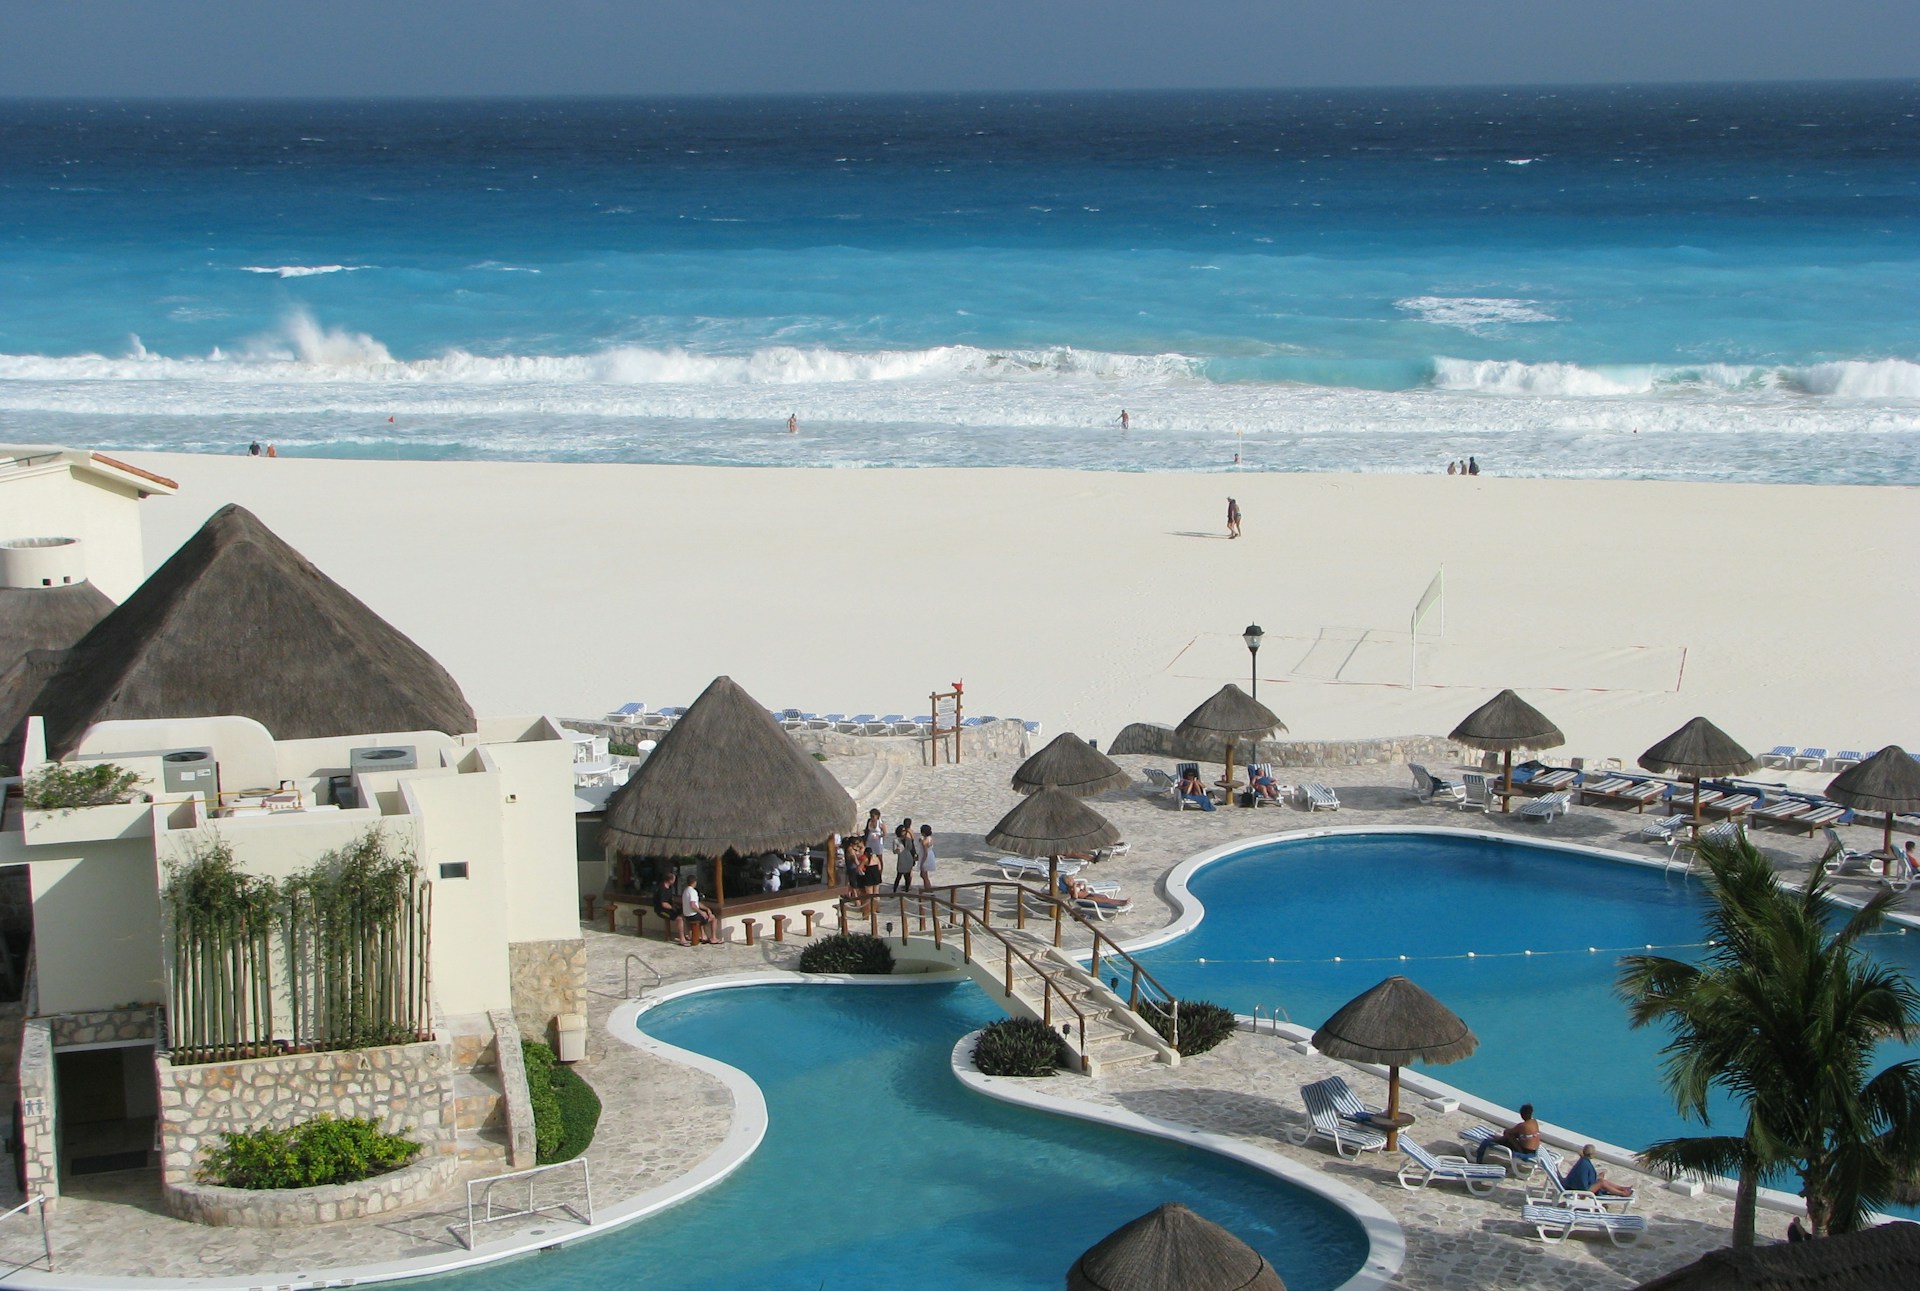 <p>Cancun is well known for its stunning beaches, perfect weather, and all inclusive resorts. It's also nearby the ancient Mayan ruins, making it a hot spot for cultural and leisure tourism.</p>